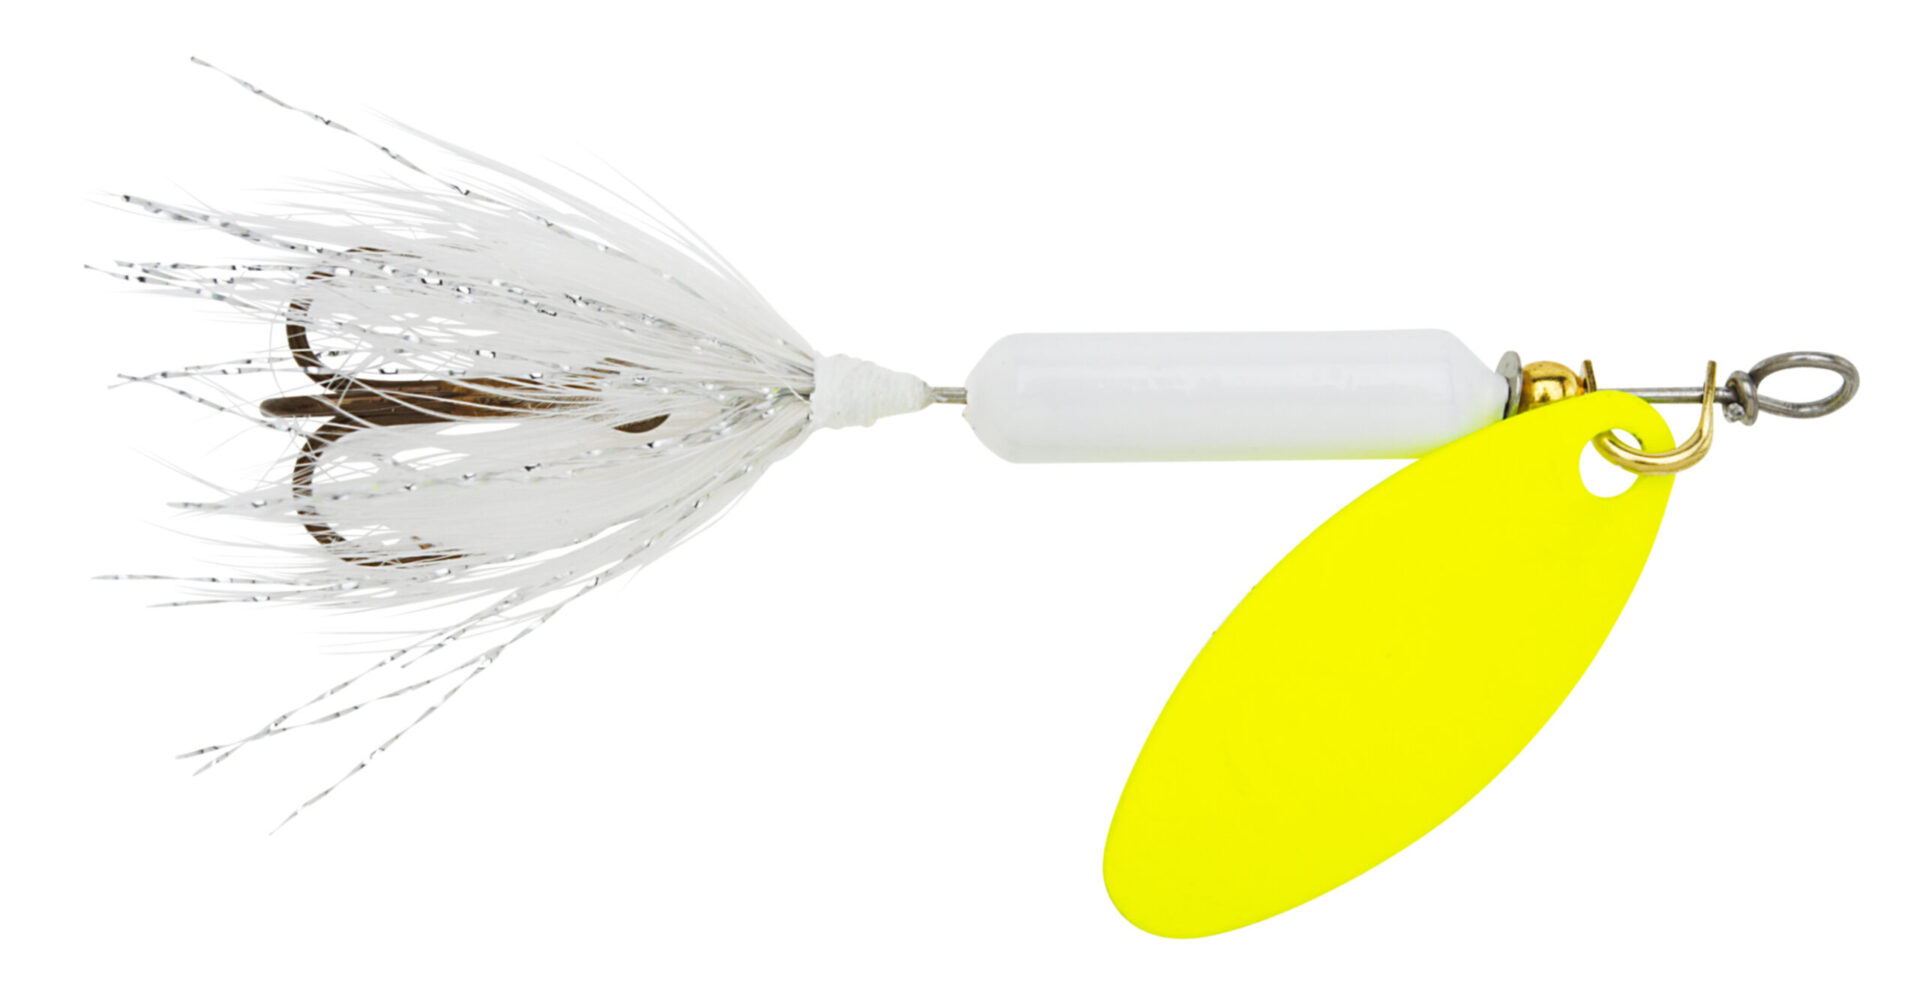  Yakima Bait Wordens Original Rooster Tail Spinner Lure, White,  1-Ounce : Fishing Spinners And Spinnerbaits : Sports & Outdoors